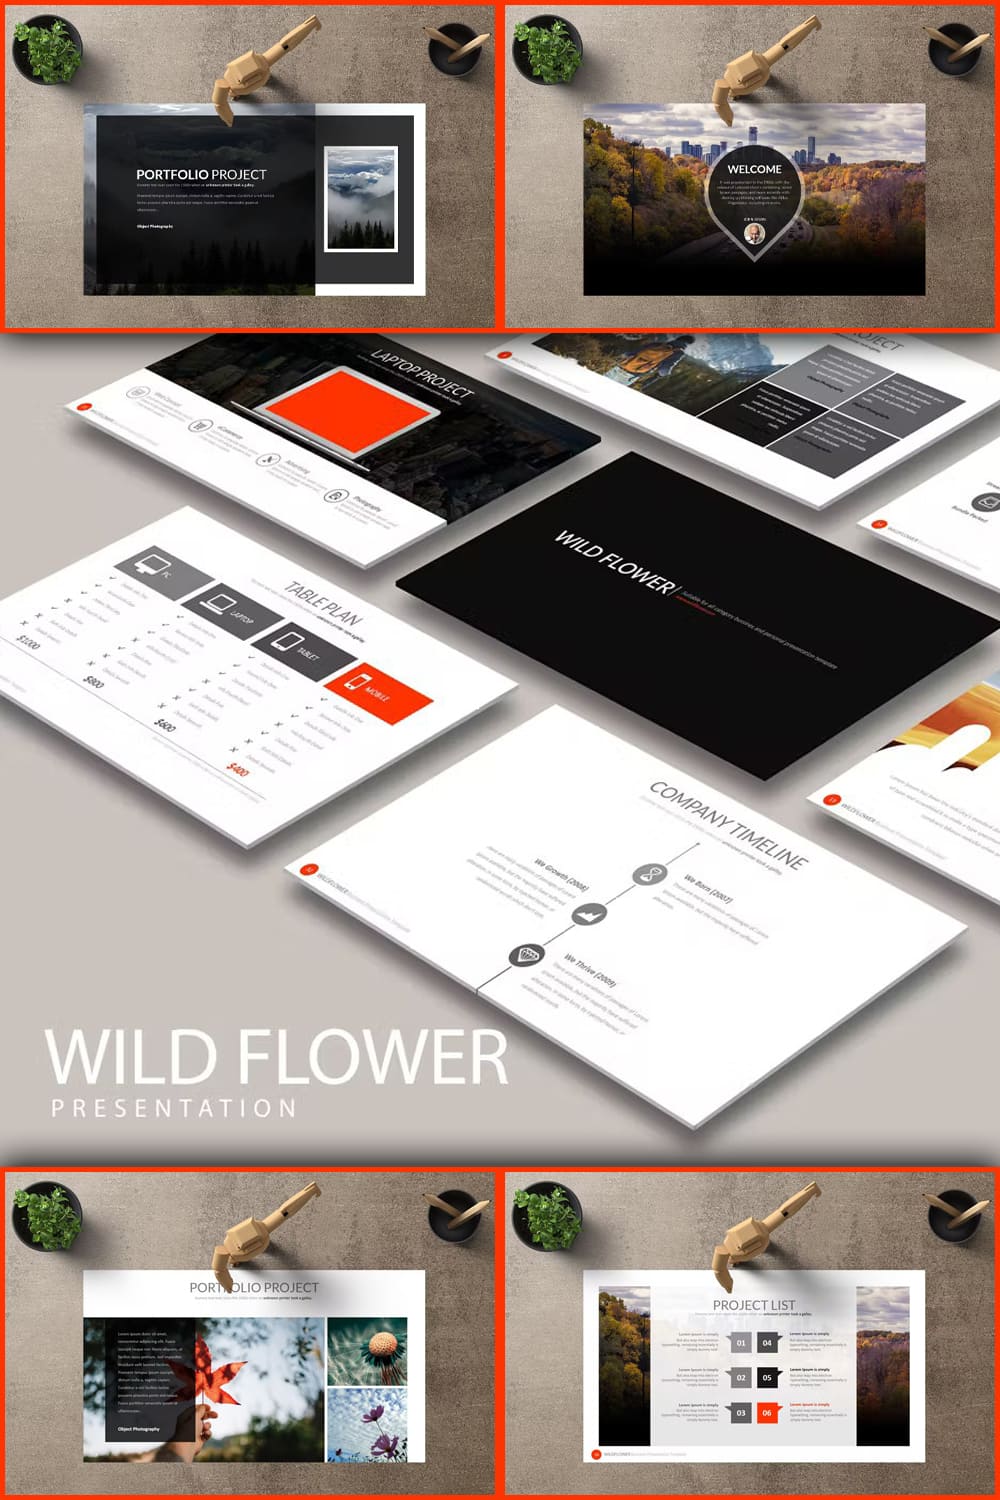 Wild Flower Powerpoint - pinterest image preview.